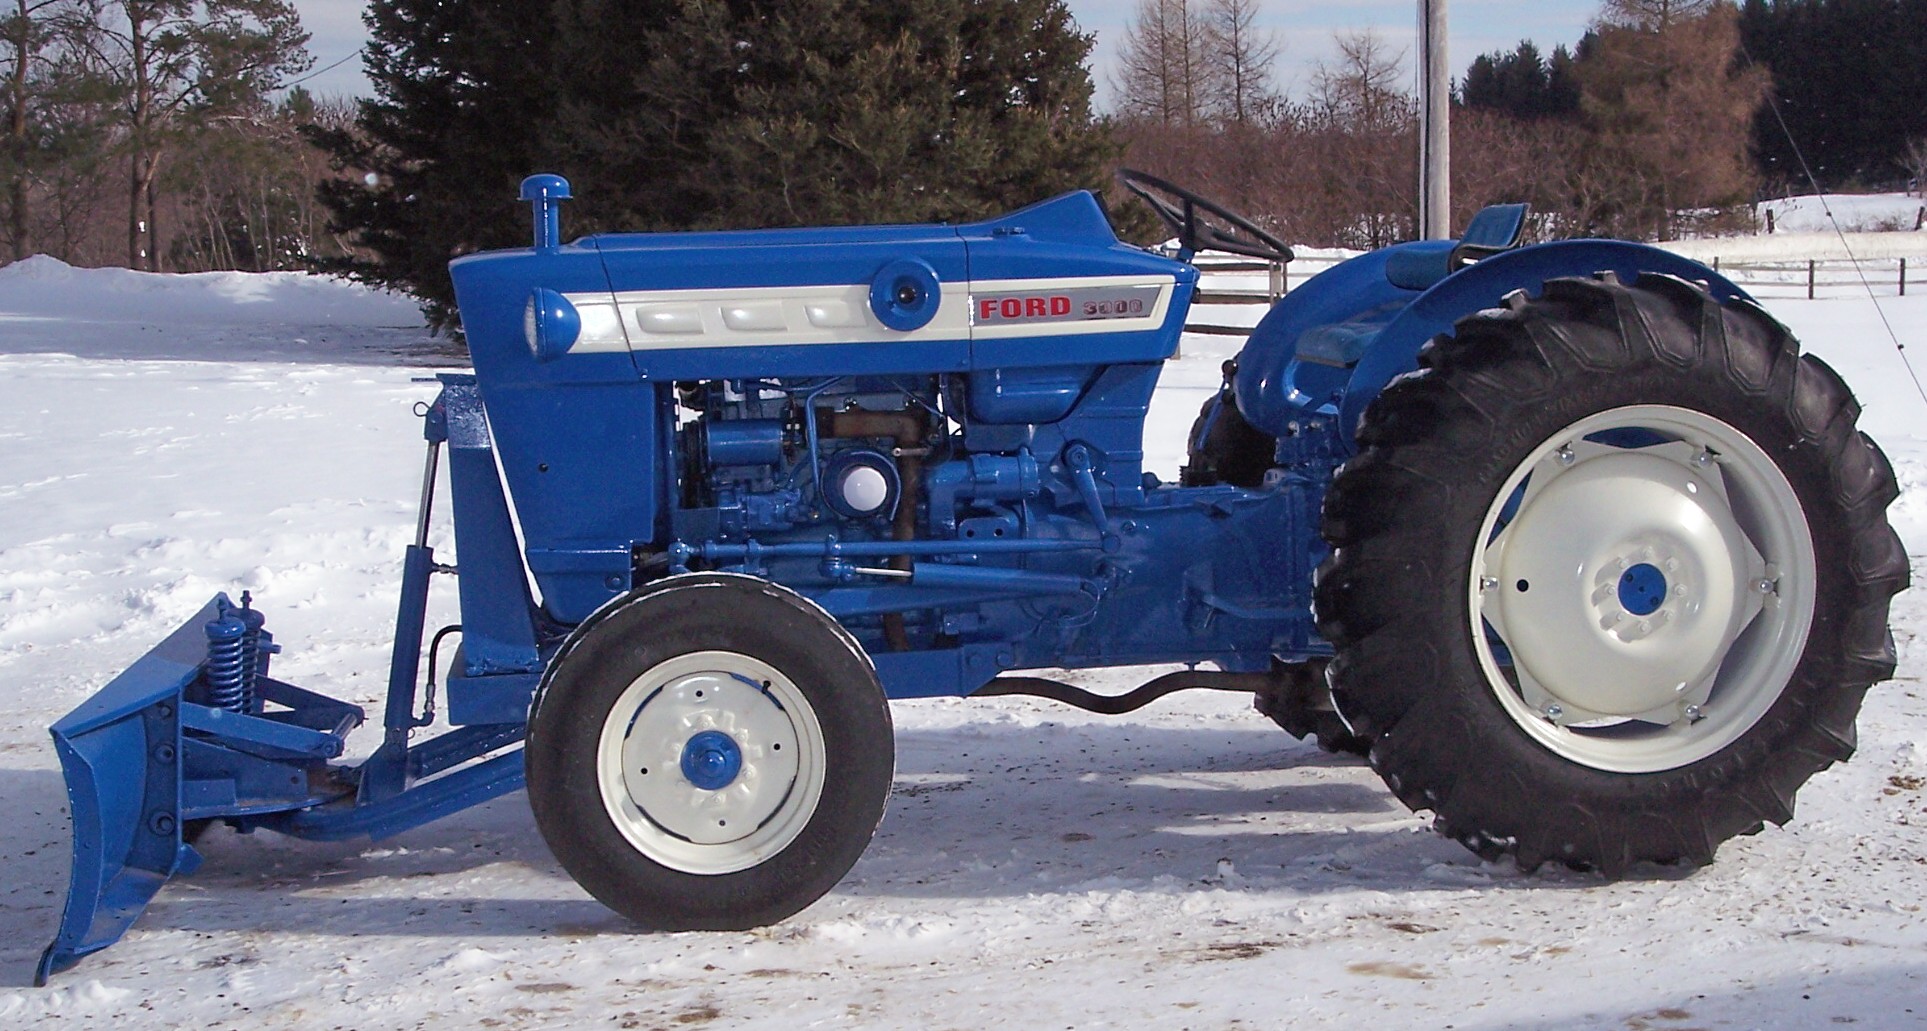 Ford 3000 Tractor Images & Pictures - Becuo